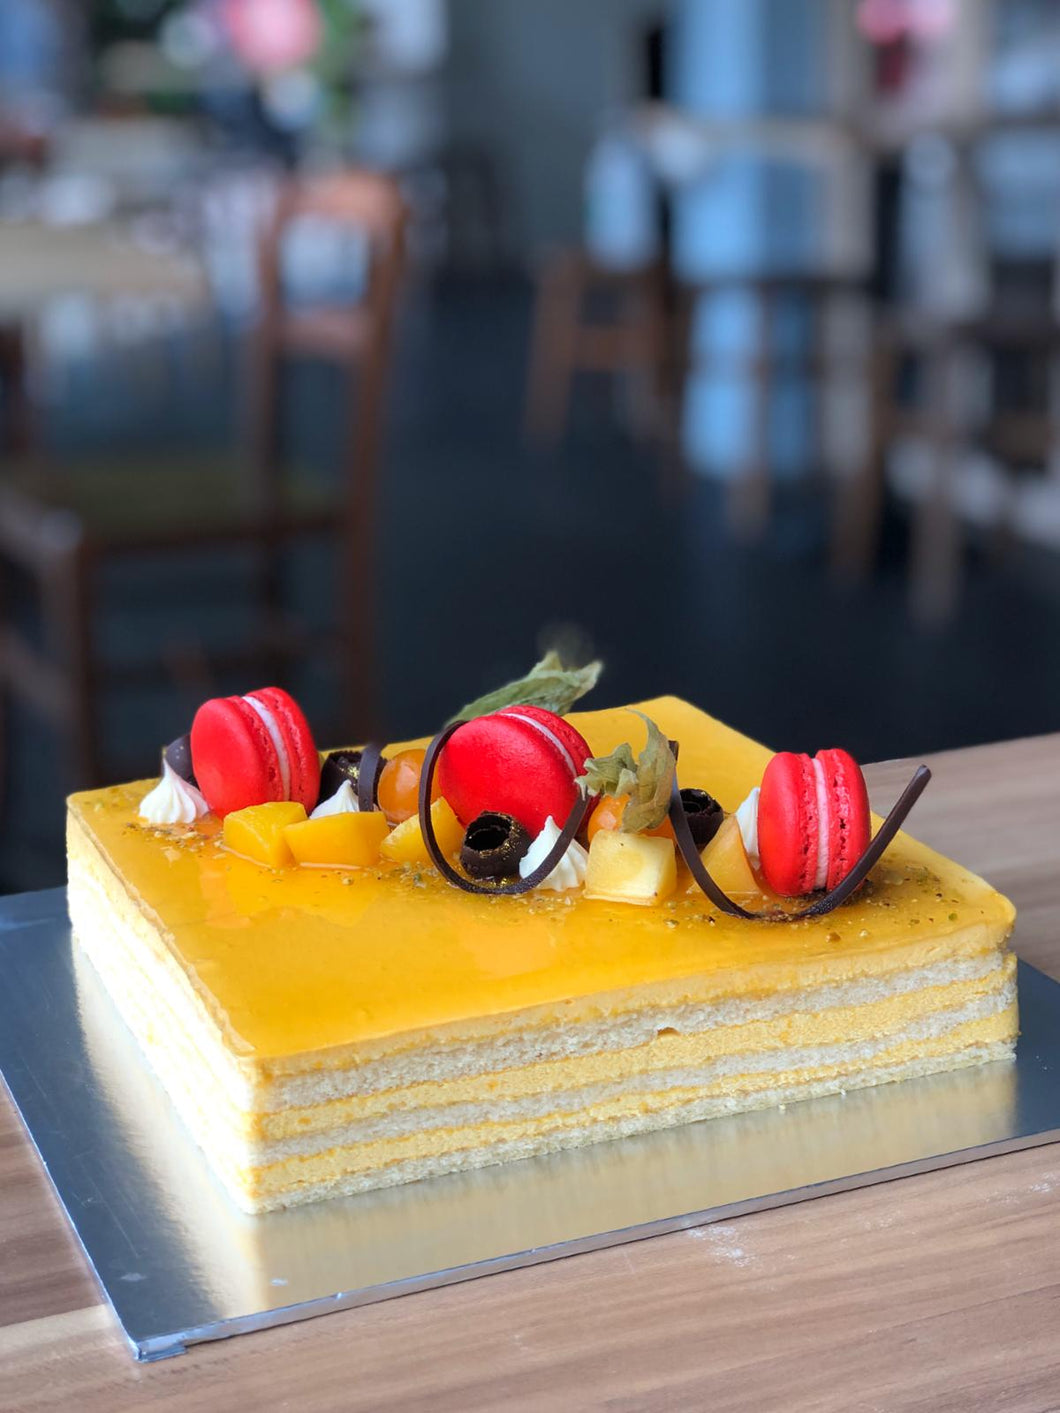 Mango delight ✨ Before we say bye till next year 🥭 1kg mango cake topped  with fresh mango, white chocolates and bedazzled with sugar... | Instagram